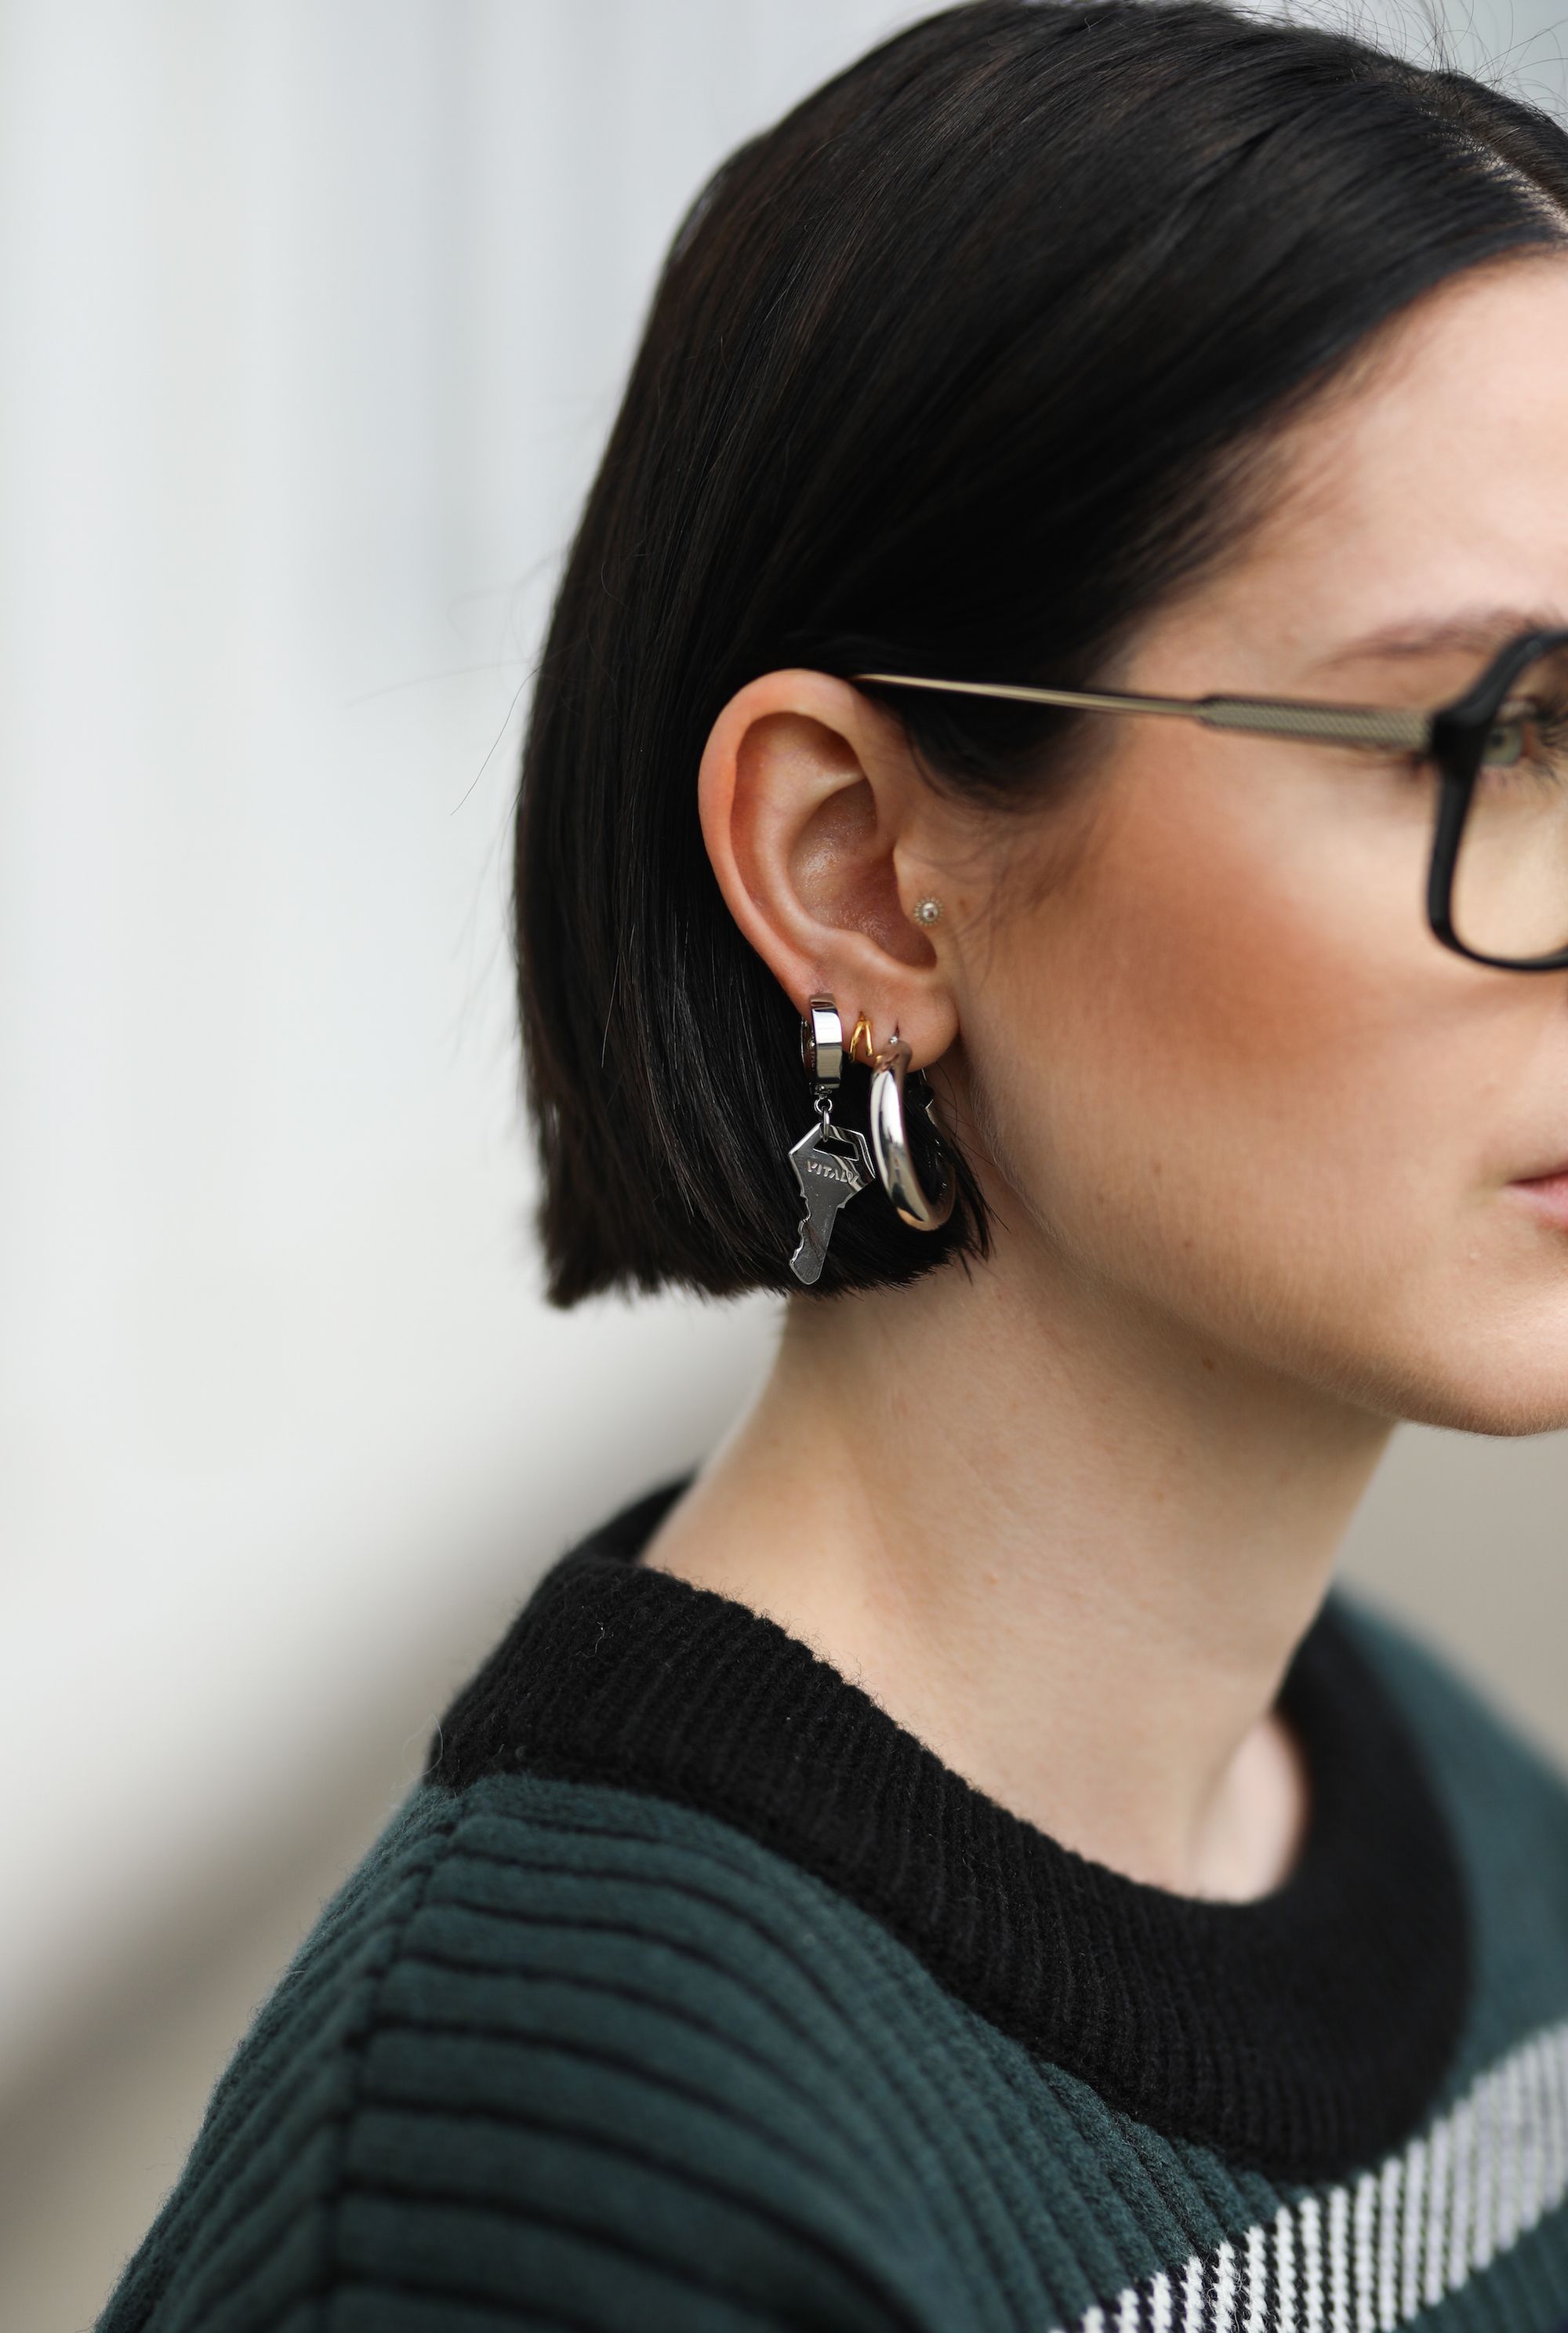 dusseldorf, germany   august 15 maria barteczko wearing holzweiler black wool sweater, vitaly silver key earring and victoria beckham black oversized glasses on august 15, 2020 in dusseldorf, germany photo by jeremy moellergetty images